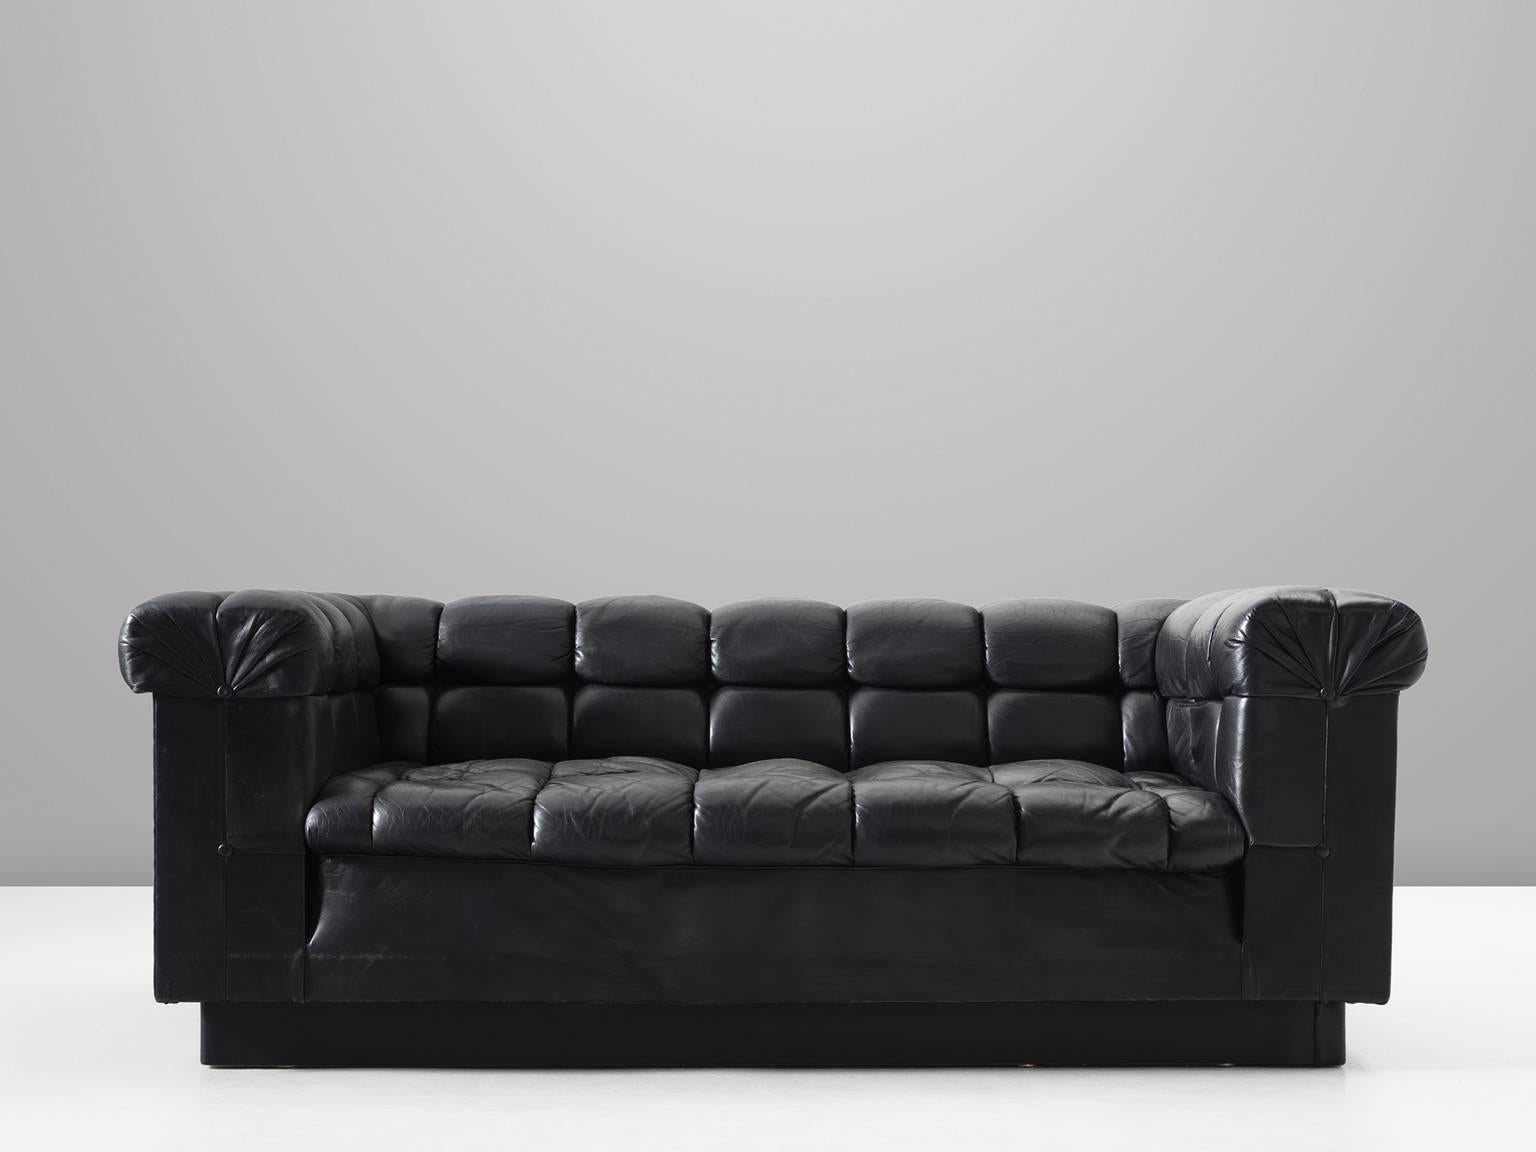 Sofa model 5407, in leather, by Edward Wormley for Dunbar, United States, 1950s.

Black leather 'Party sofa' by American designer Edward Wormley. This sofa has an interesting appearance of a classic Chesterfield sofa with a modern aesthetic. The